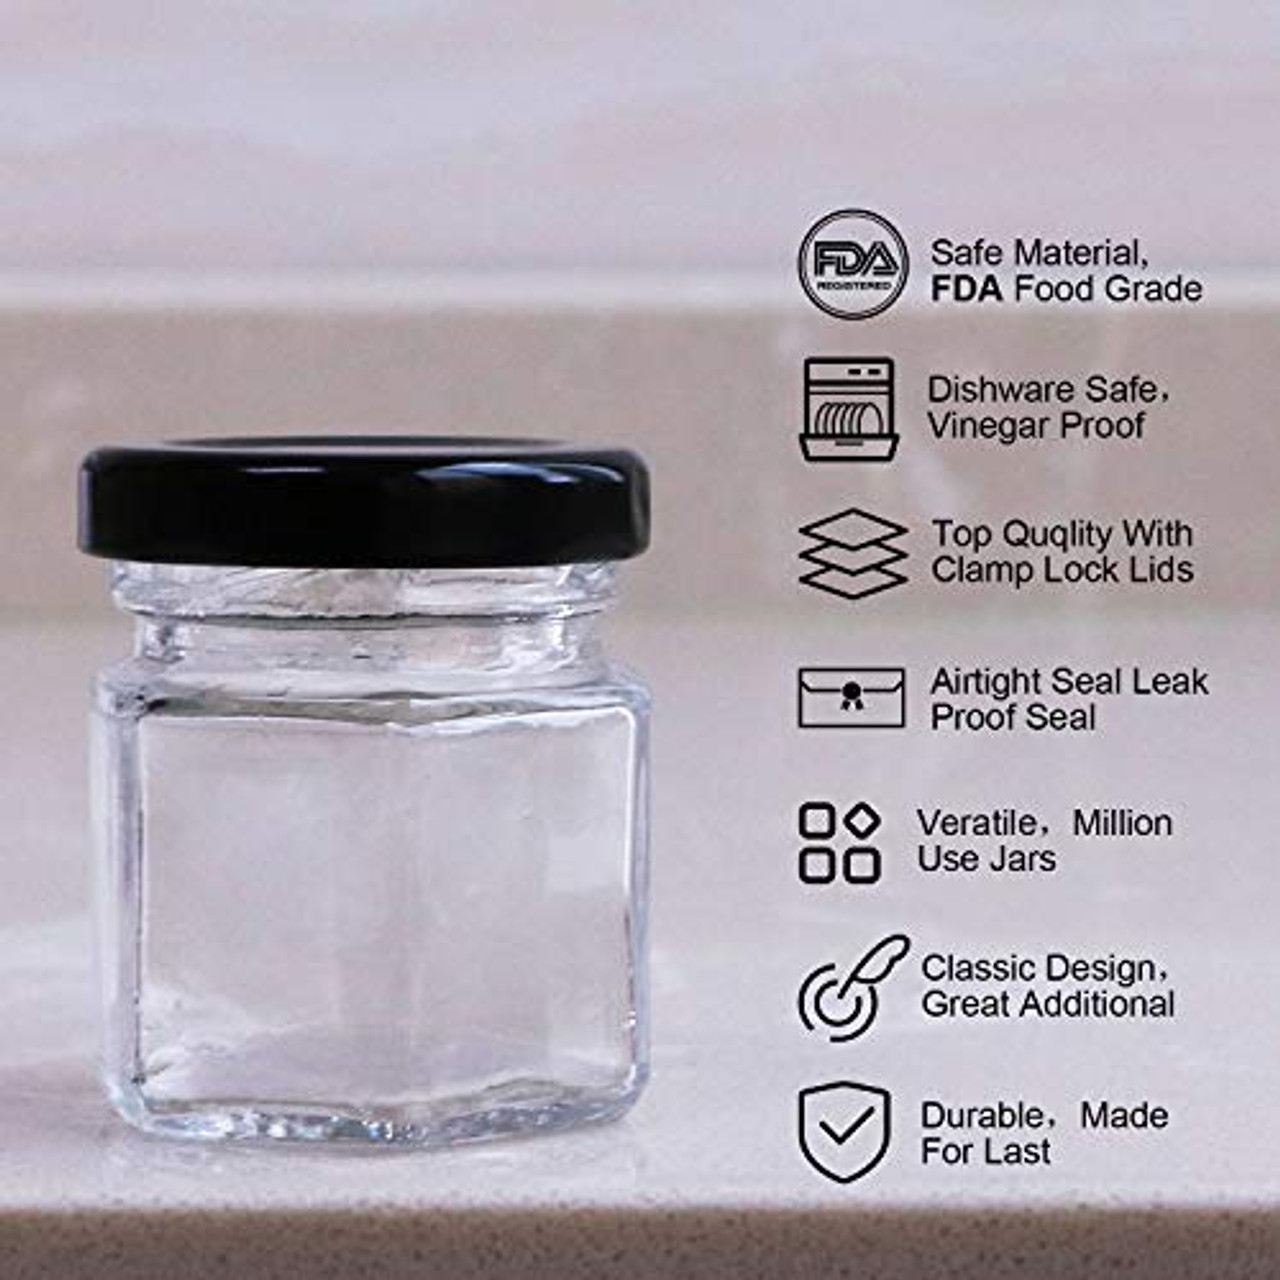 Glass Jars With Metal Lids Empty Food Storage Containers, Canning Jar For  Spice, Powder, Liquid, Sample - Bottles,jars & Boxes - AliExpress